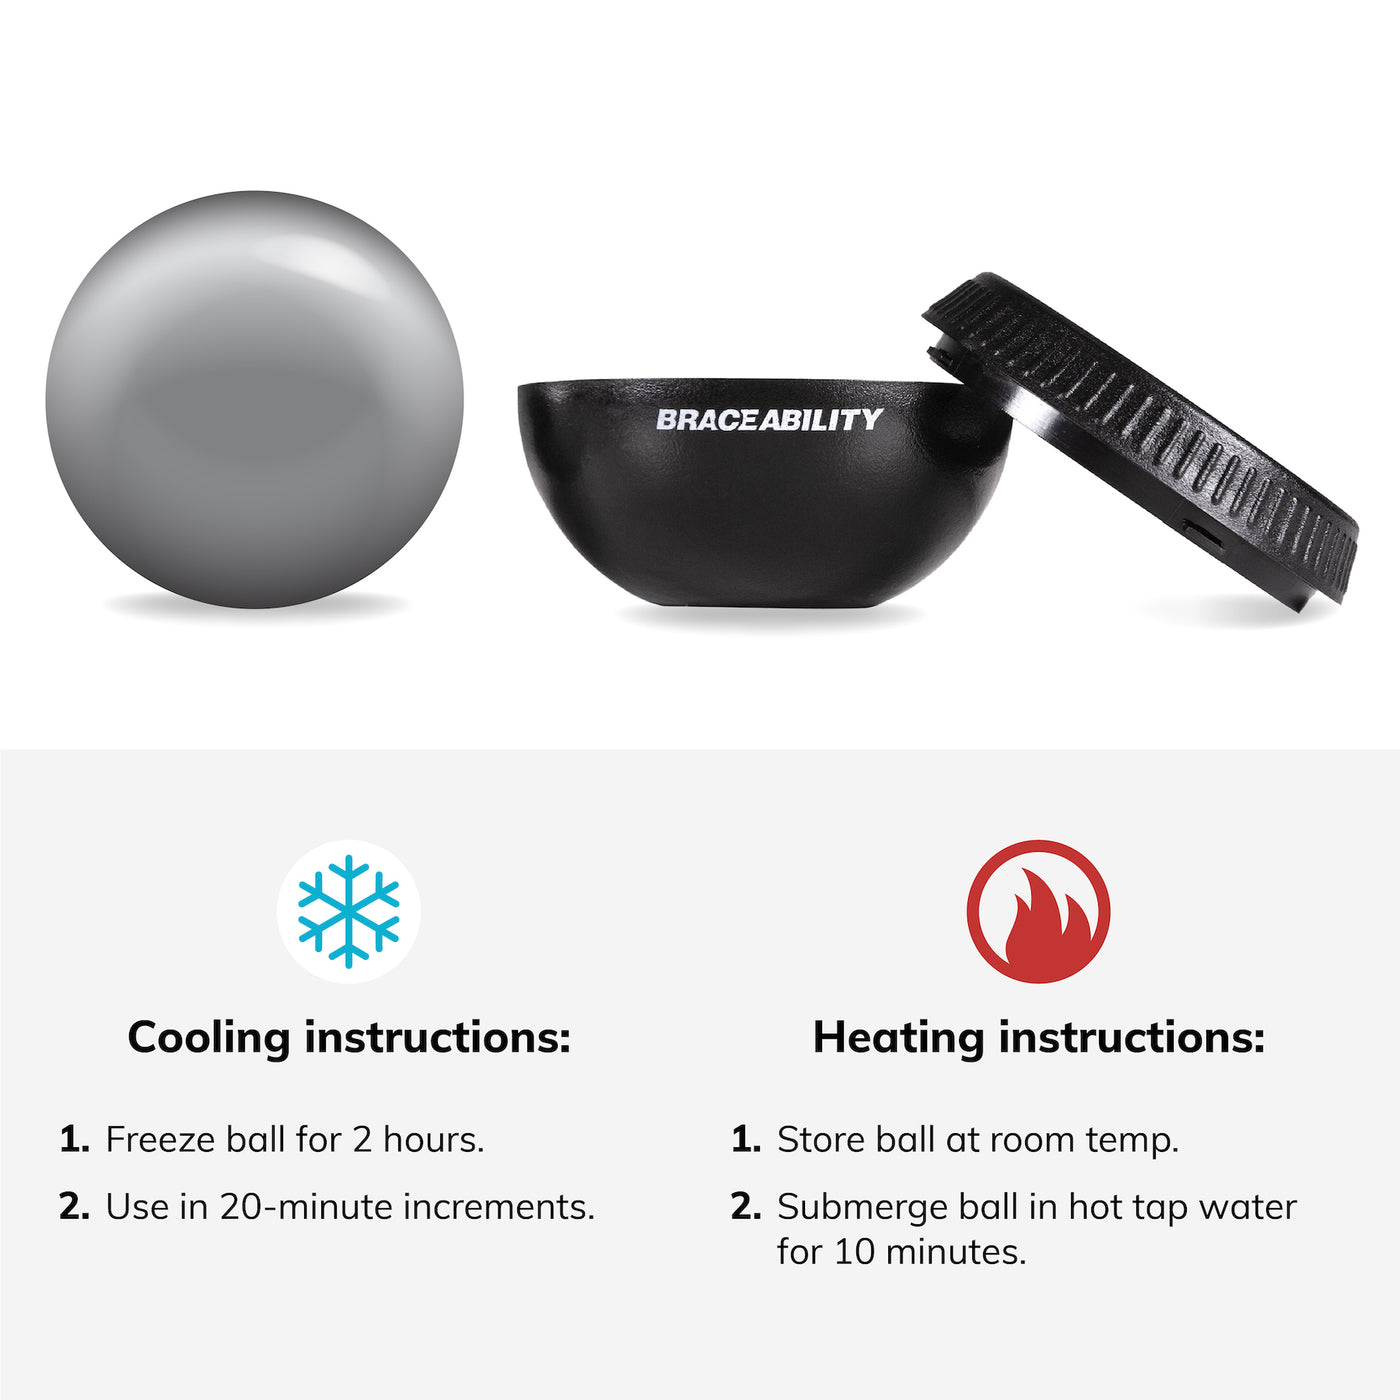 to free the cryotherapy roller, remove the ball and freeze for two hours